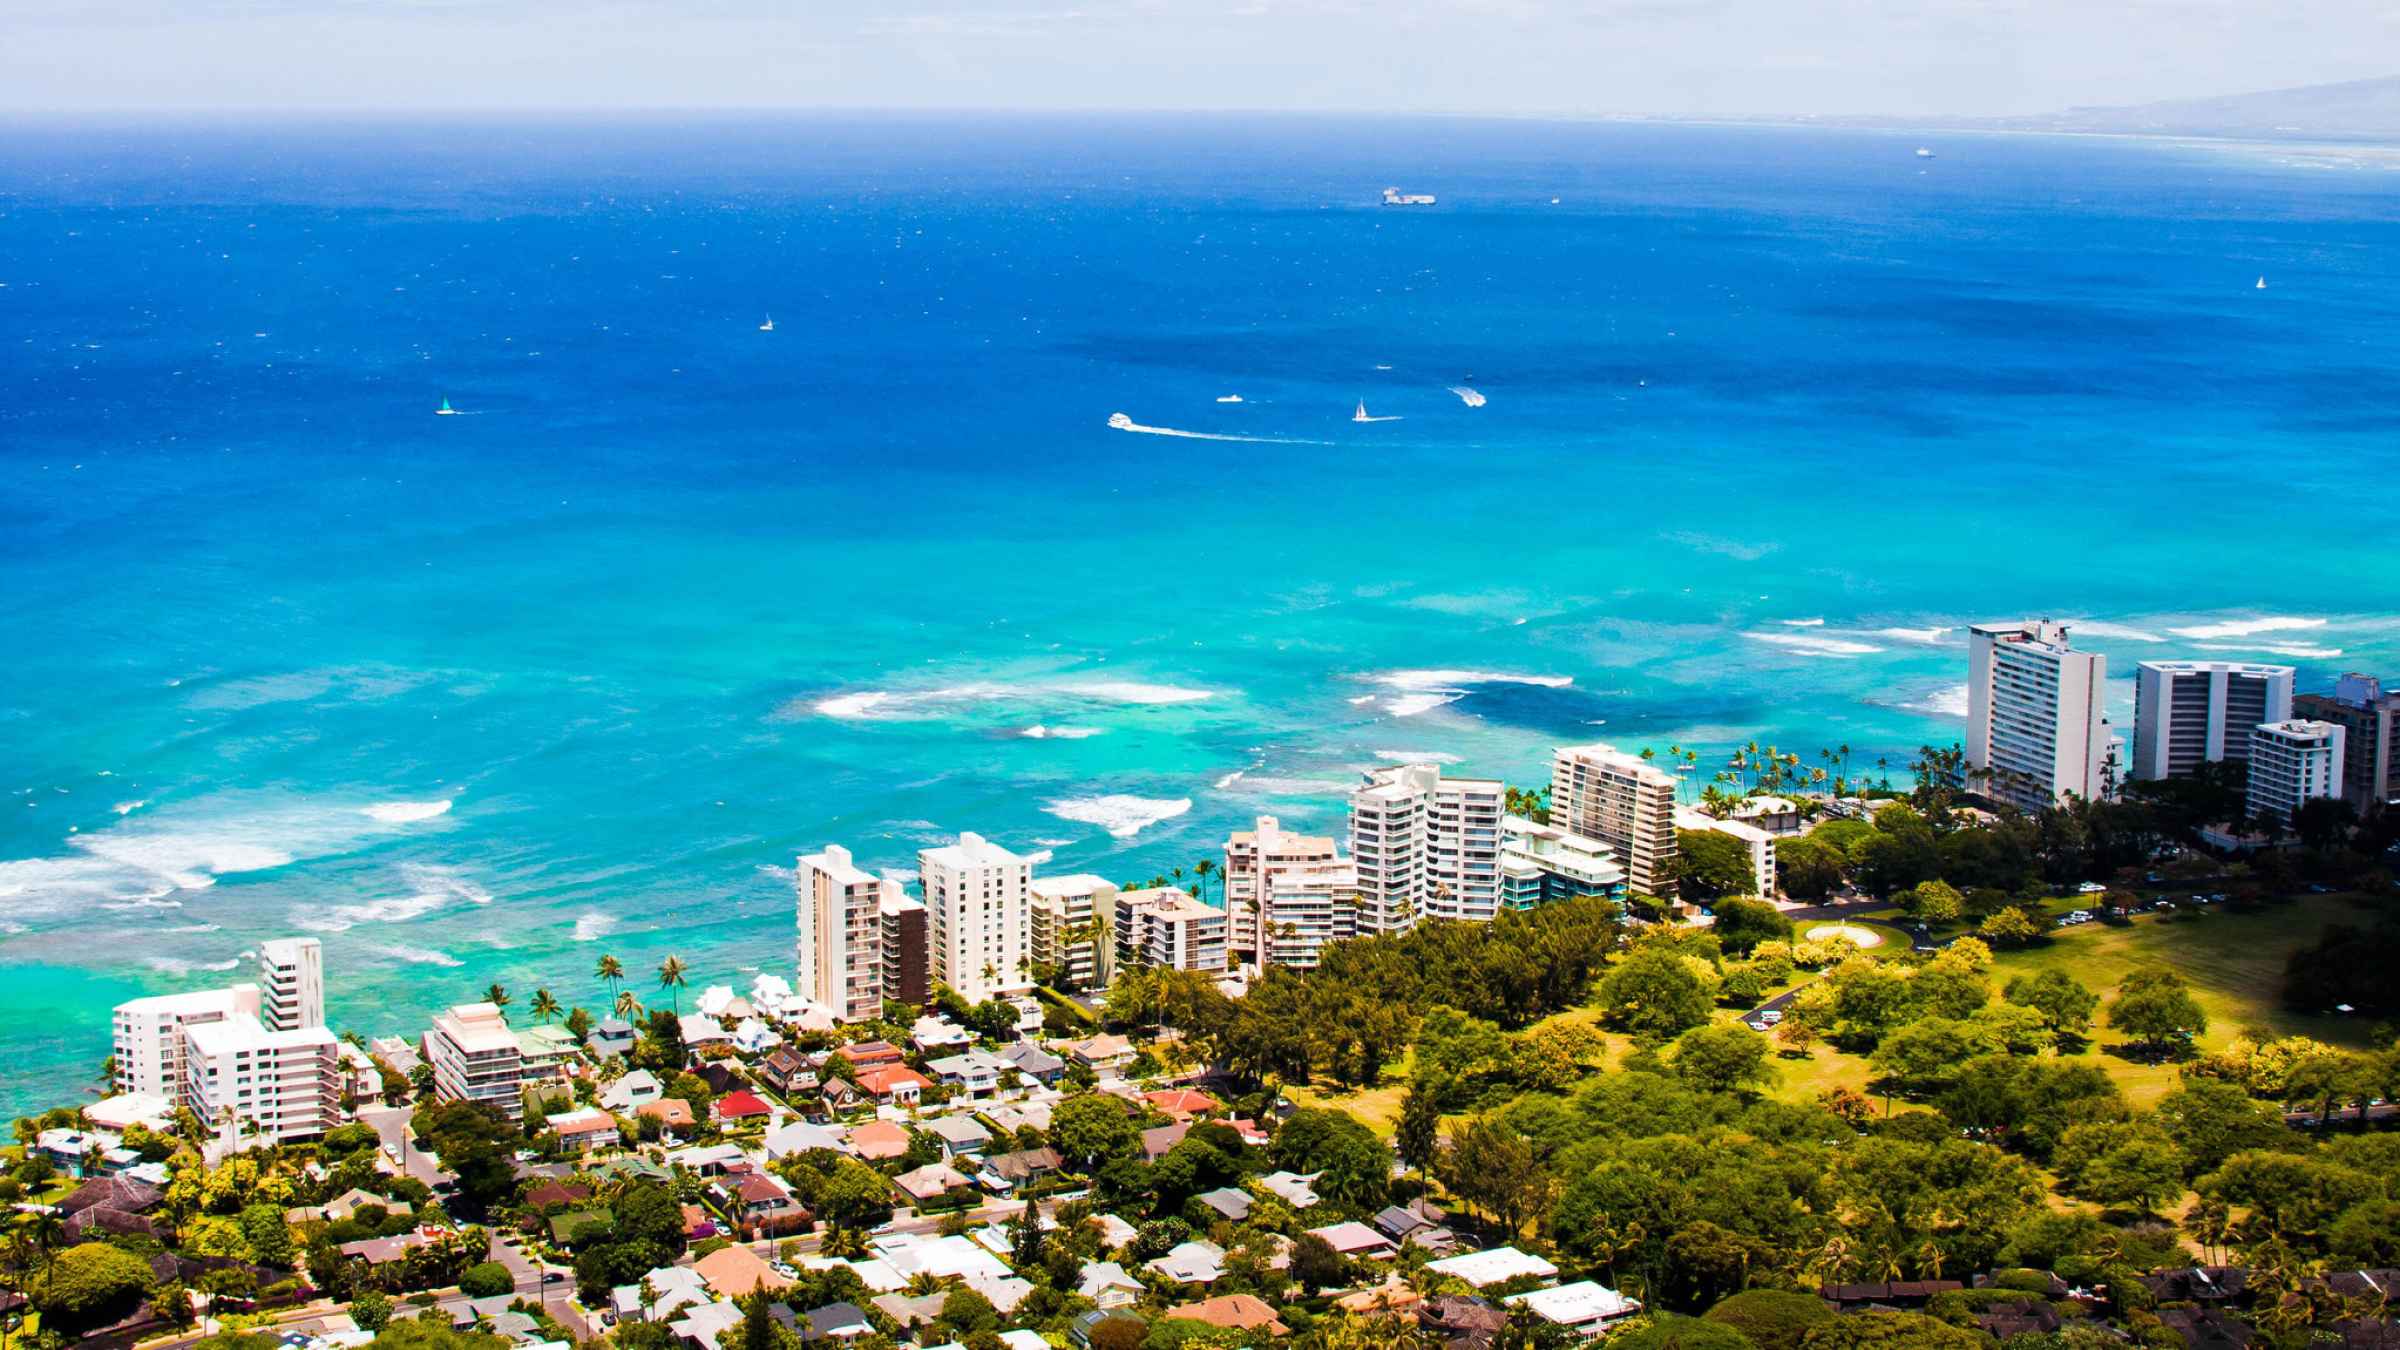 The BEST Honolulu Tours and Things to Do in 2022 - FREE Cancellation